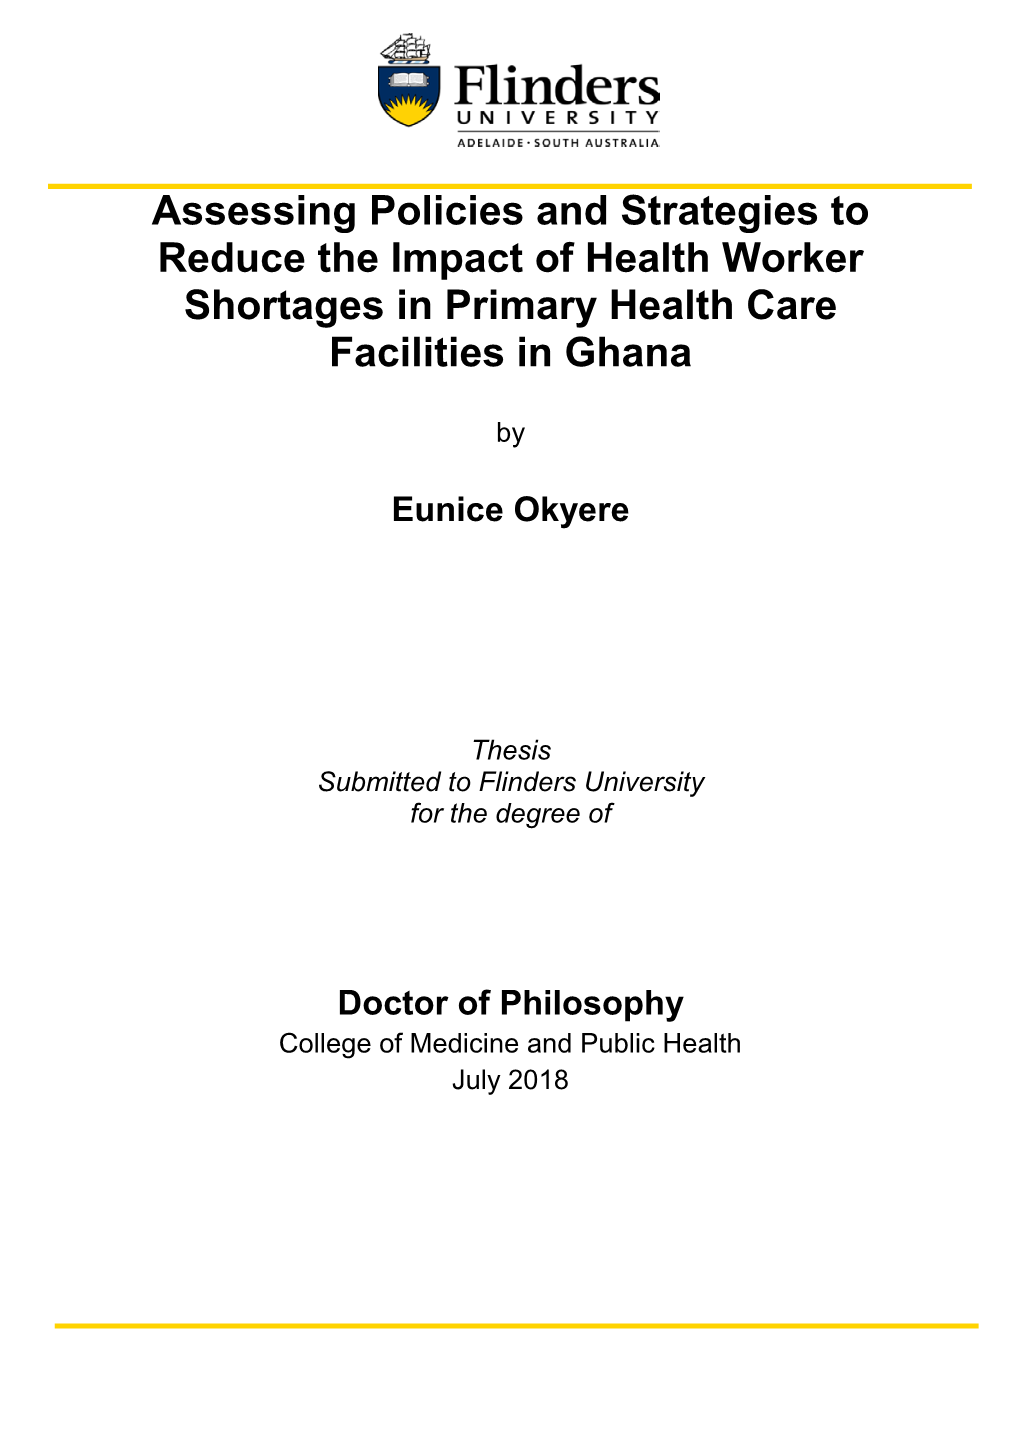 Assessing Policies and Strategies to Reduce the Impact of Health Worker Shortages in Primary Health Care Facilities in Ghana